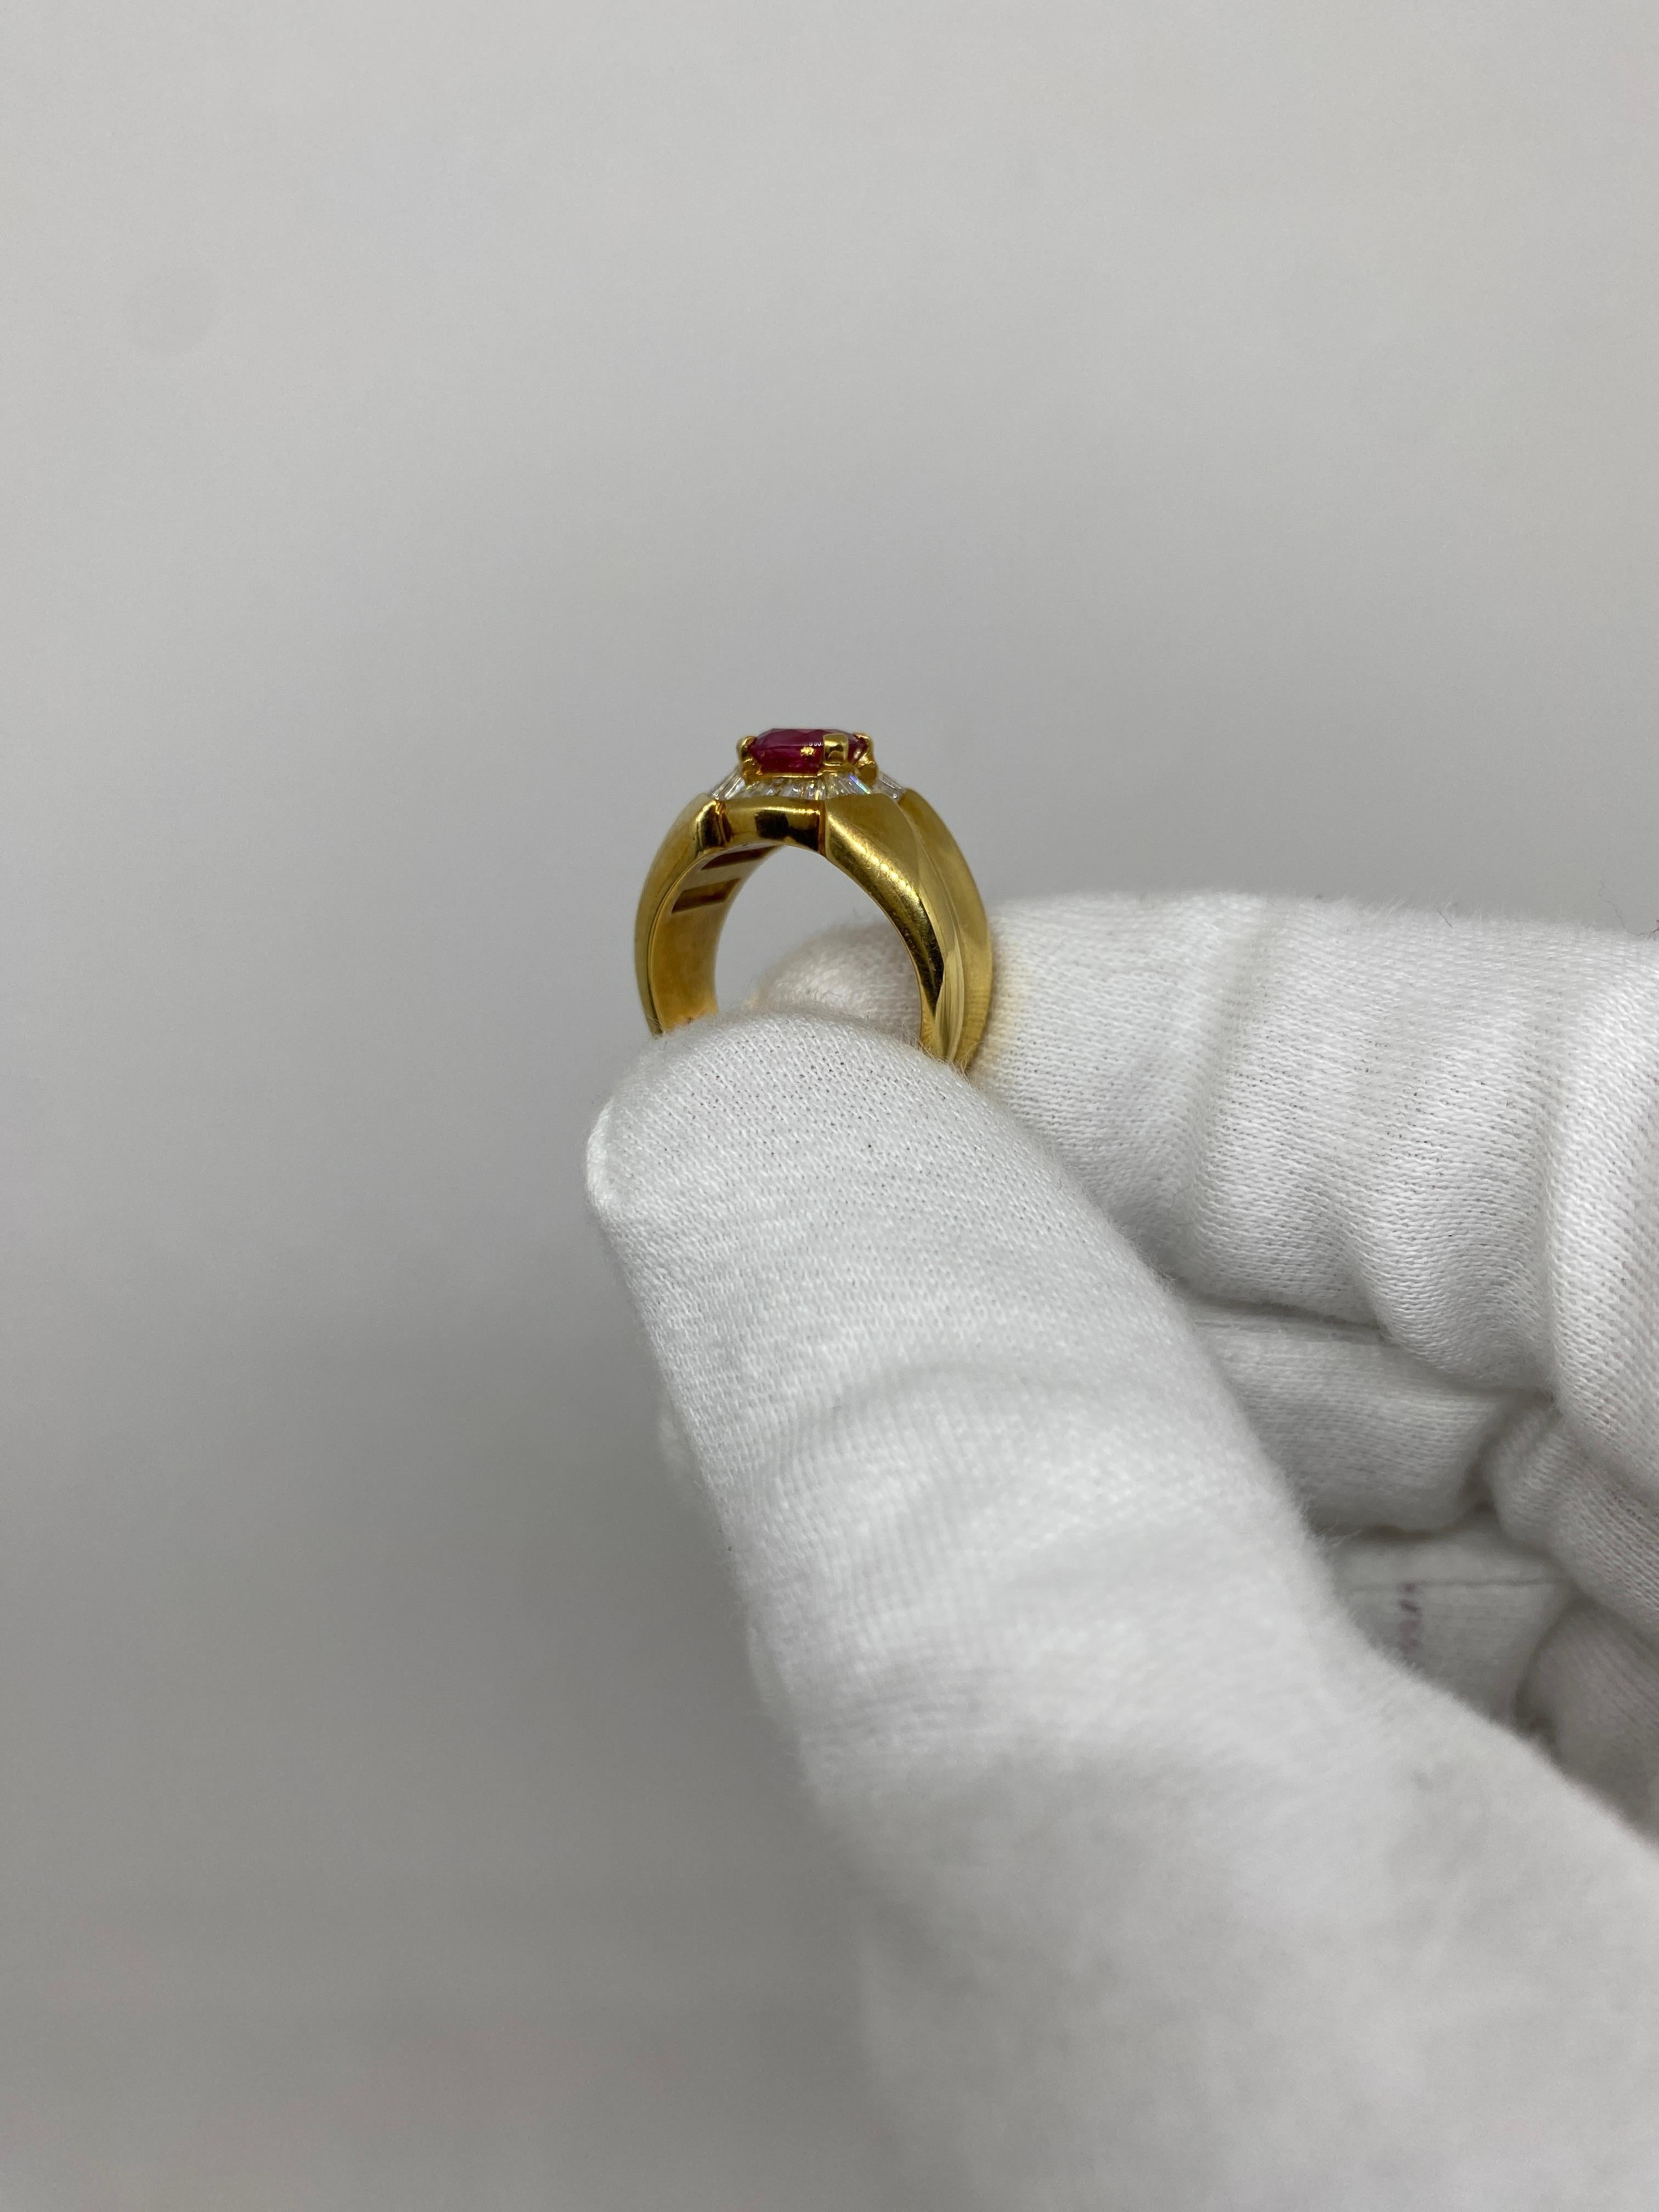 Ring made of 18kt yellow gold with oval-cut ruby for and natural white baguette-cut diamonds

Welcome to our jewelry collection, where every piece tells a story of timeless elegance and unparalleled craftsmanship. As a family-run business in Italy